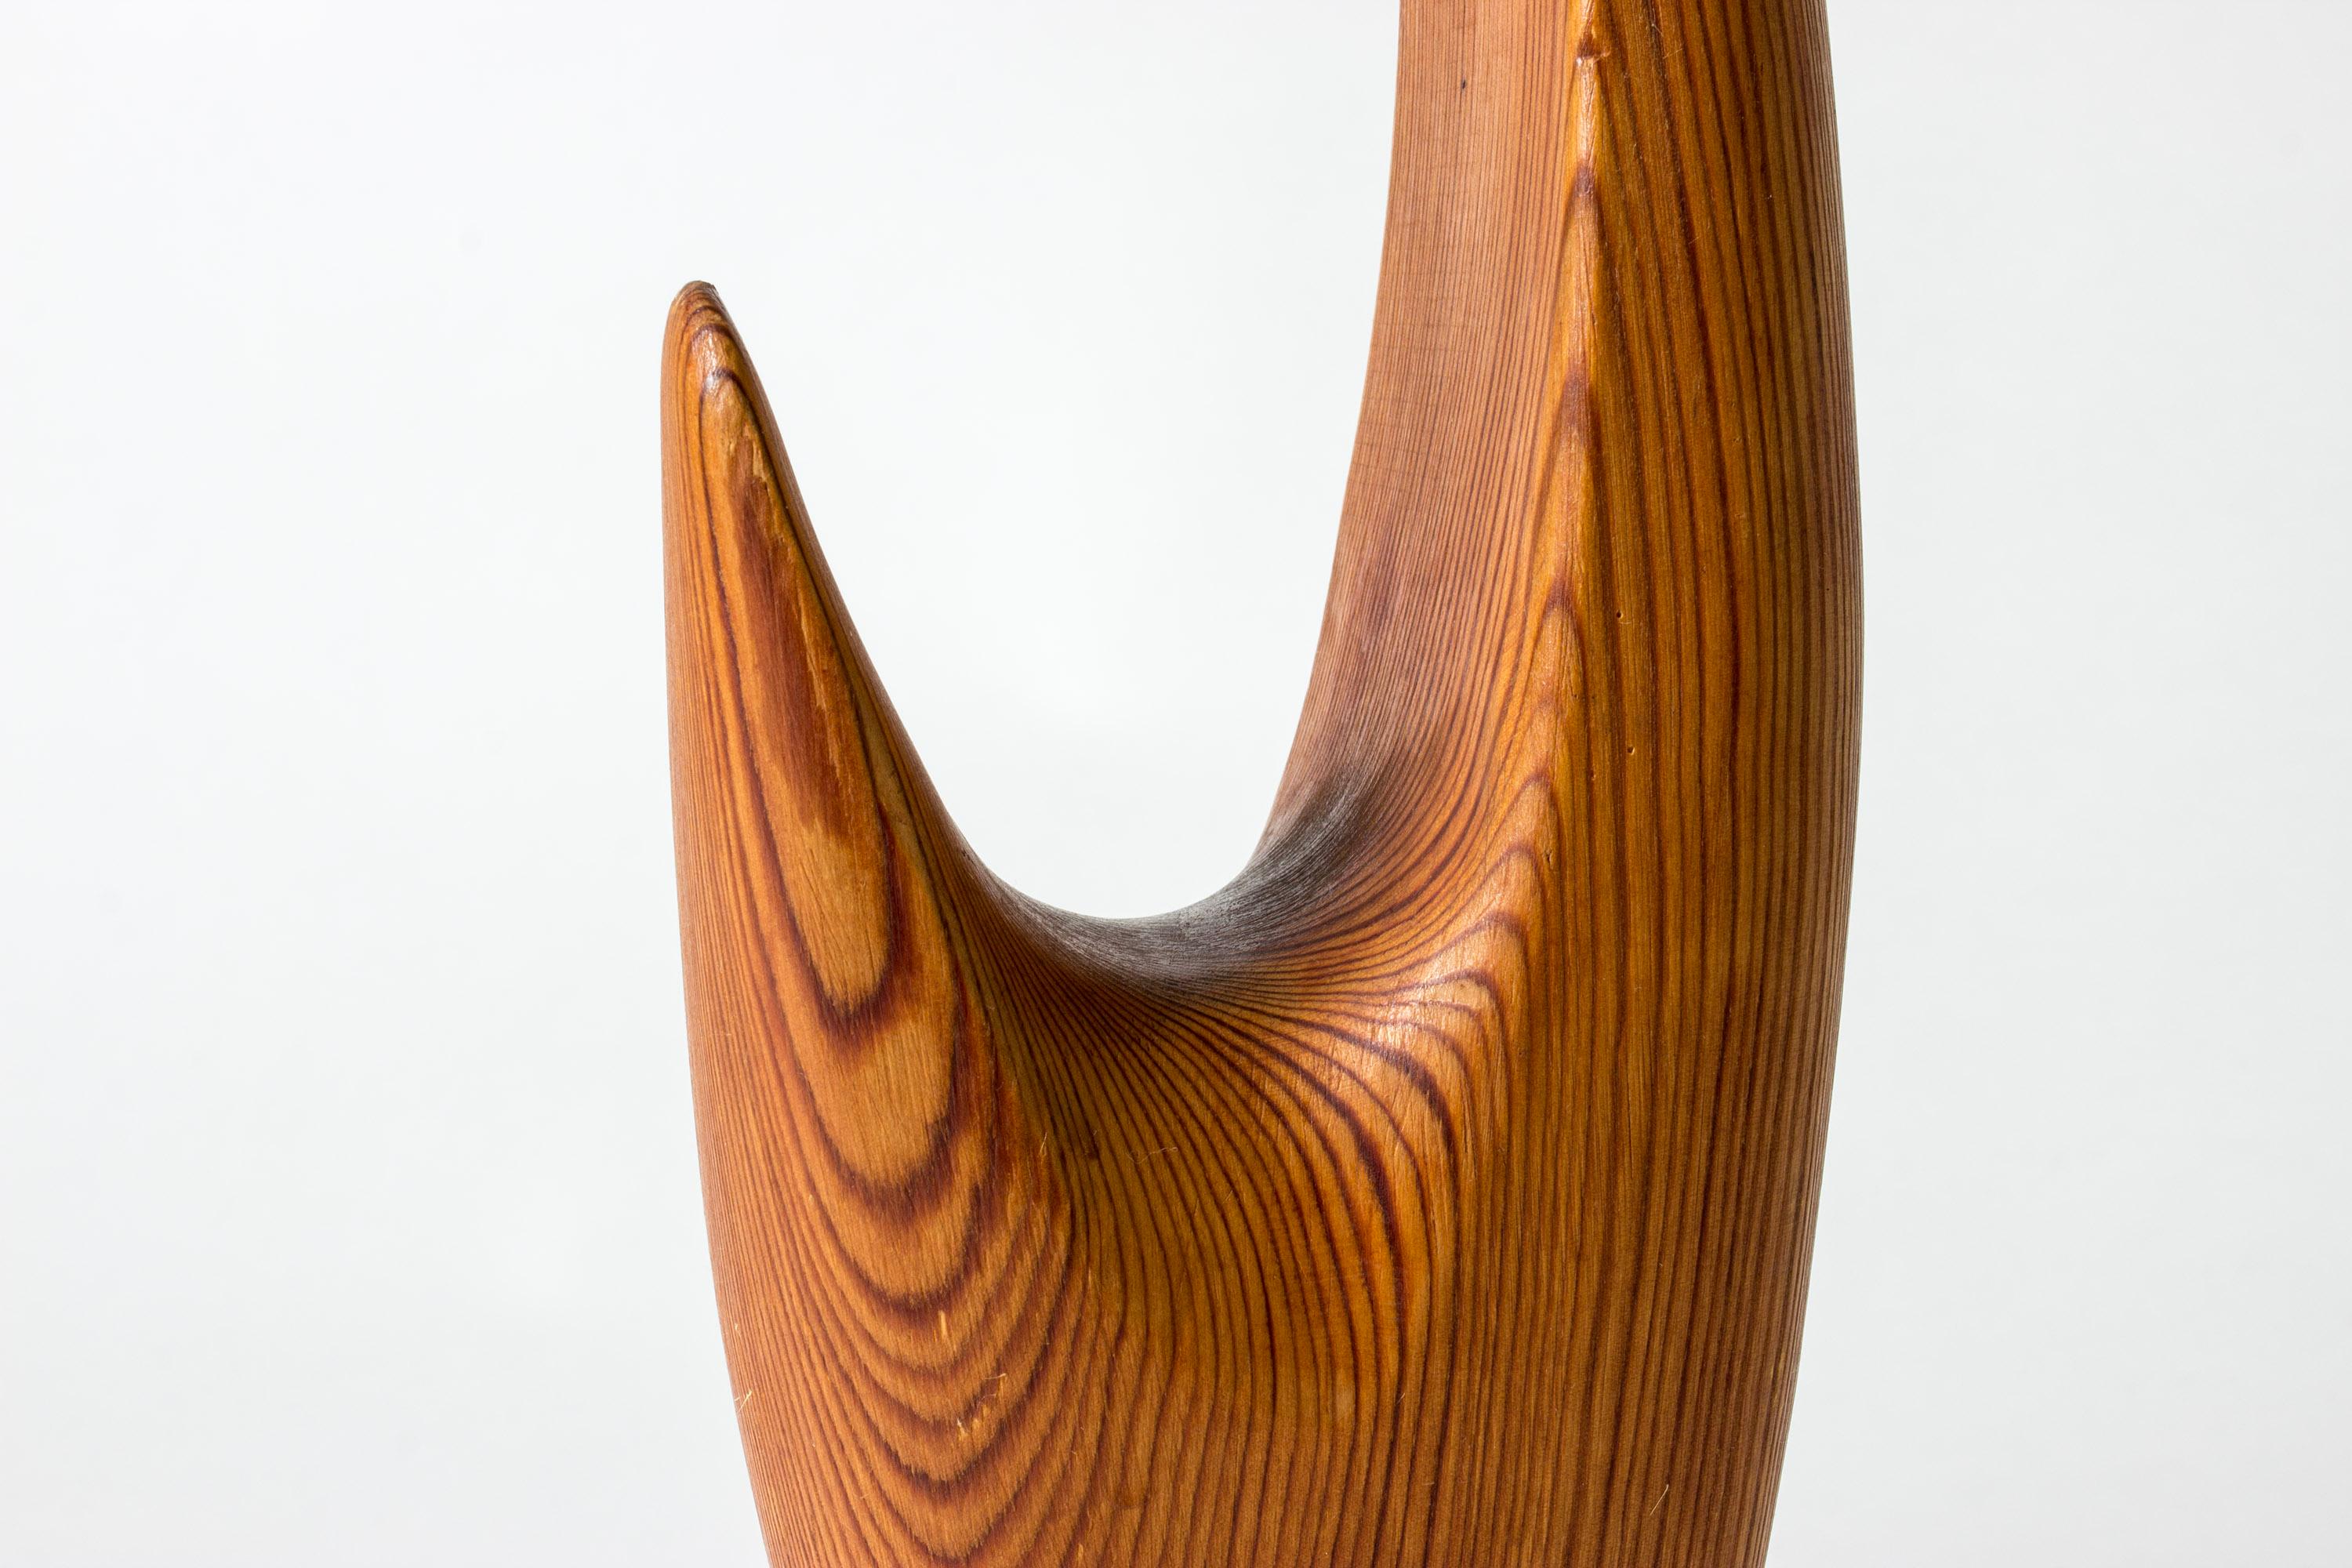 Midcentury Wooden Abstract Sculpture by Johnny Mattsson, Sweden, 1962 In Good Condition For Sale In Stockholm, SE